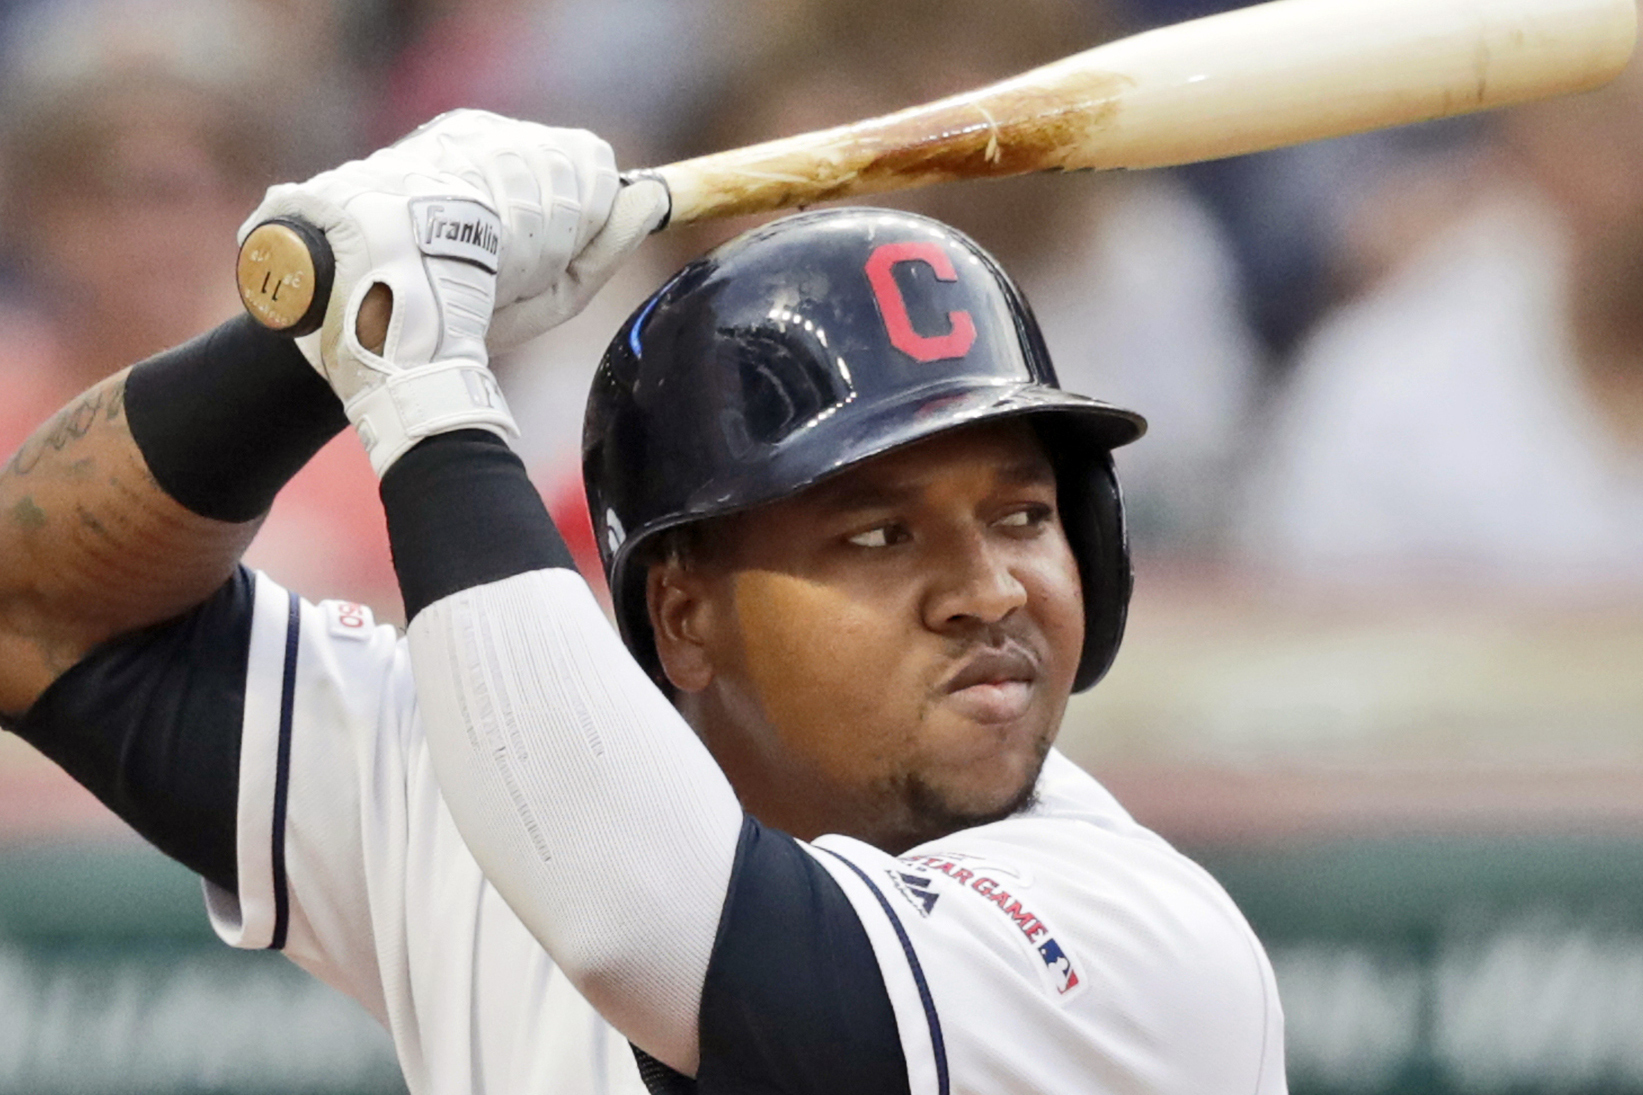 Jose Ramirez comes out swinging with Grand Slam, home run and 7